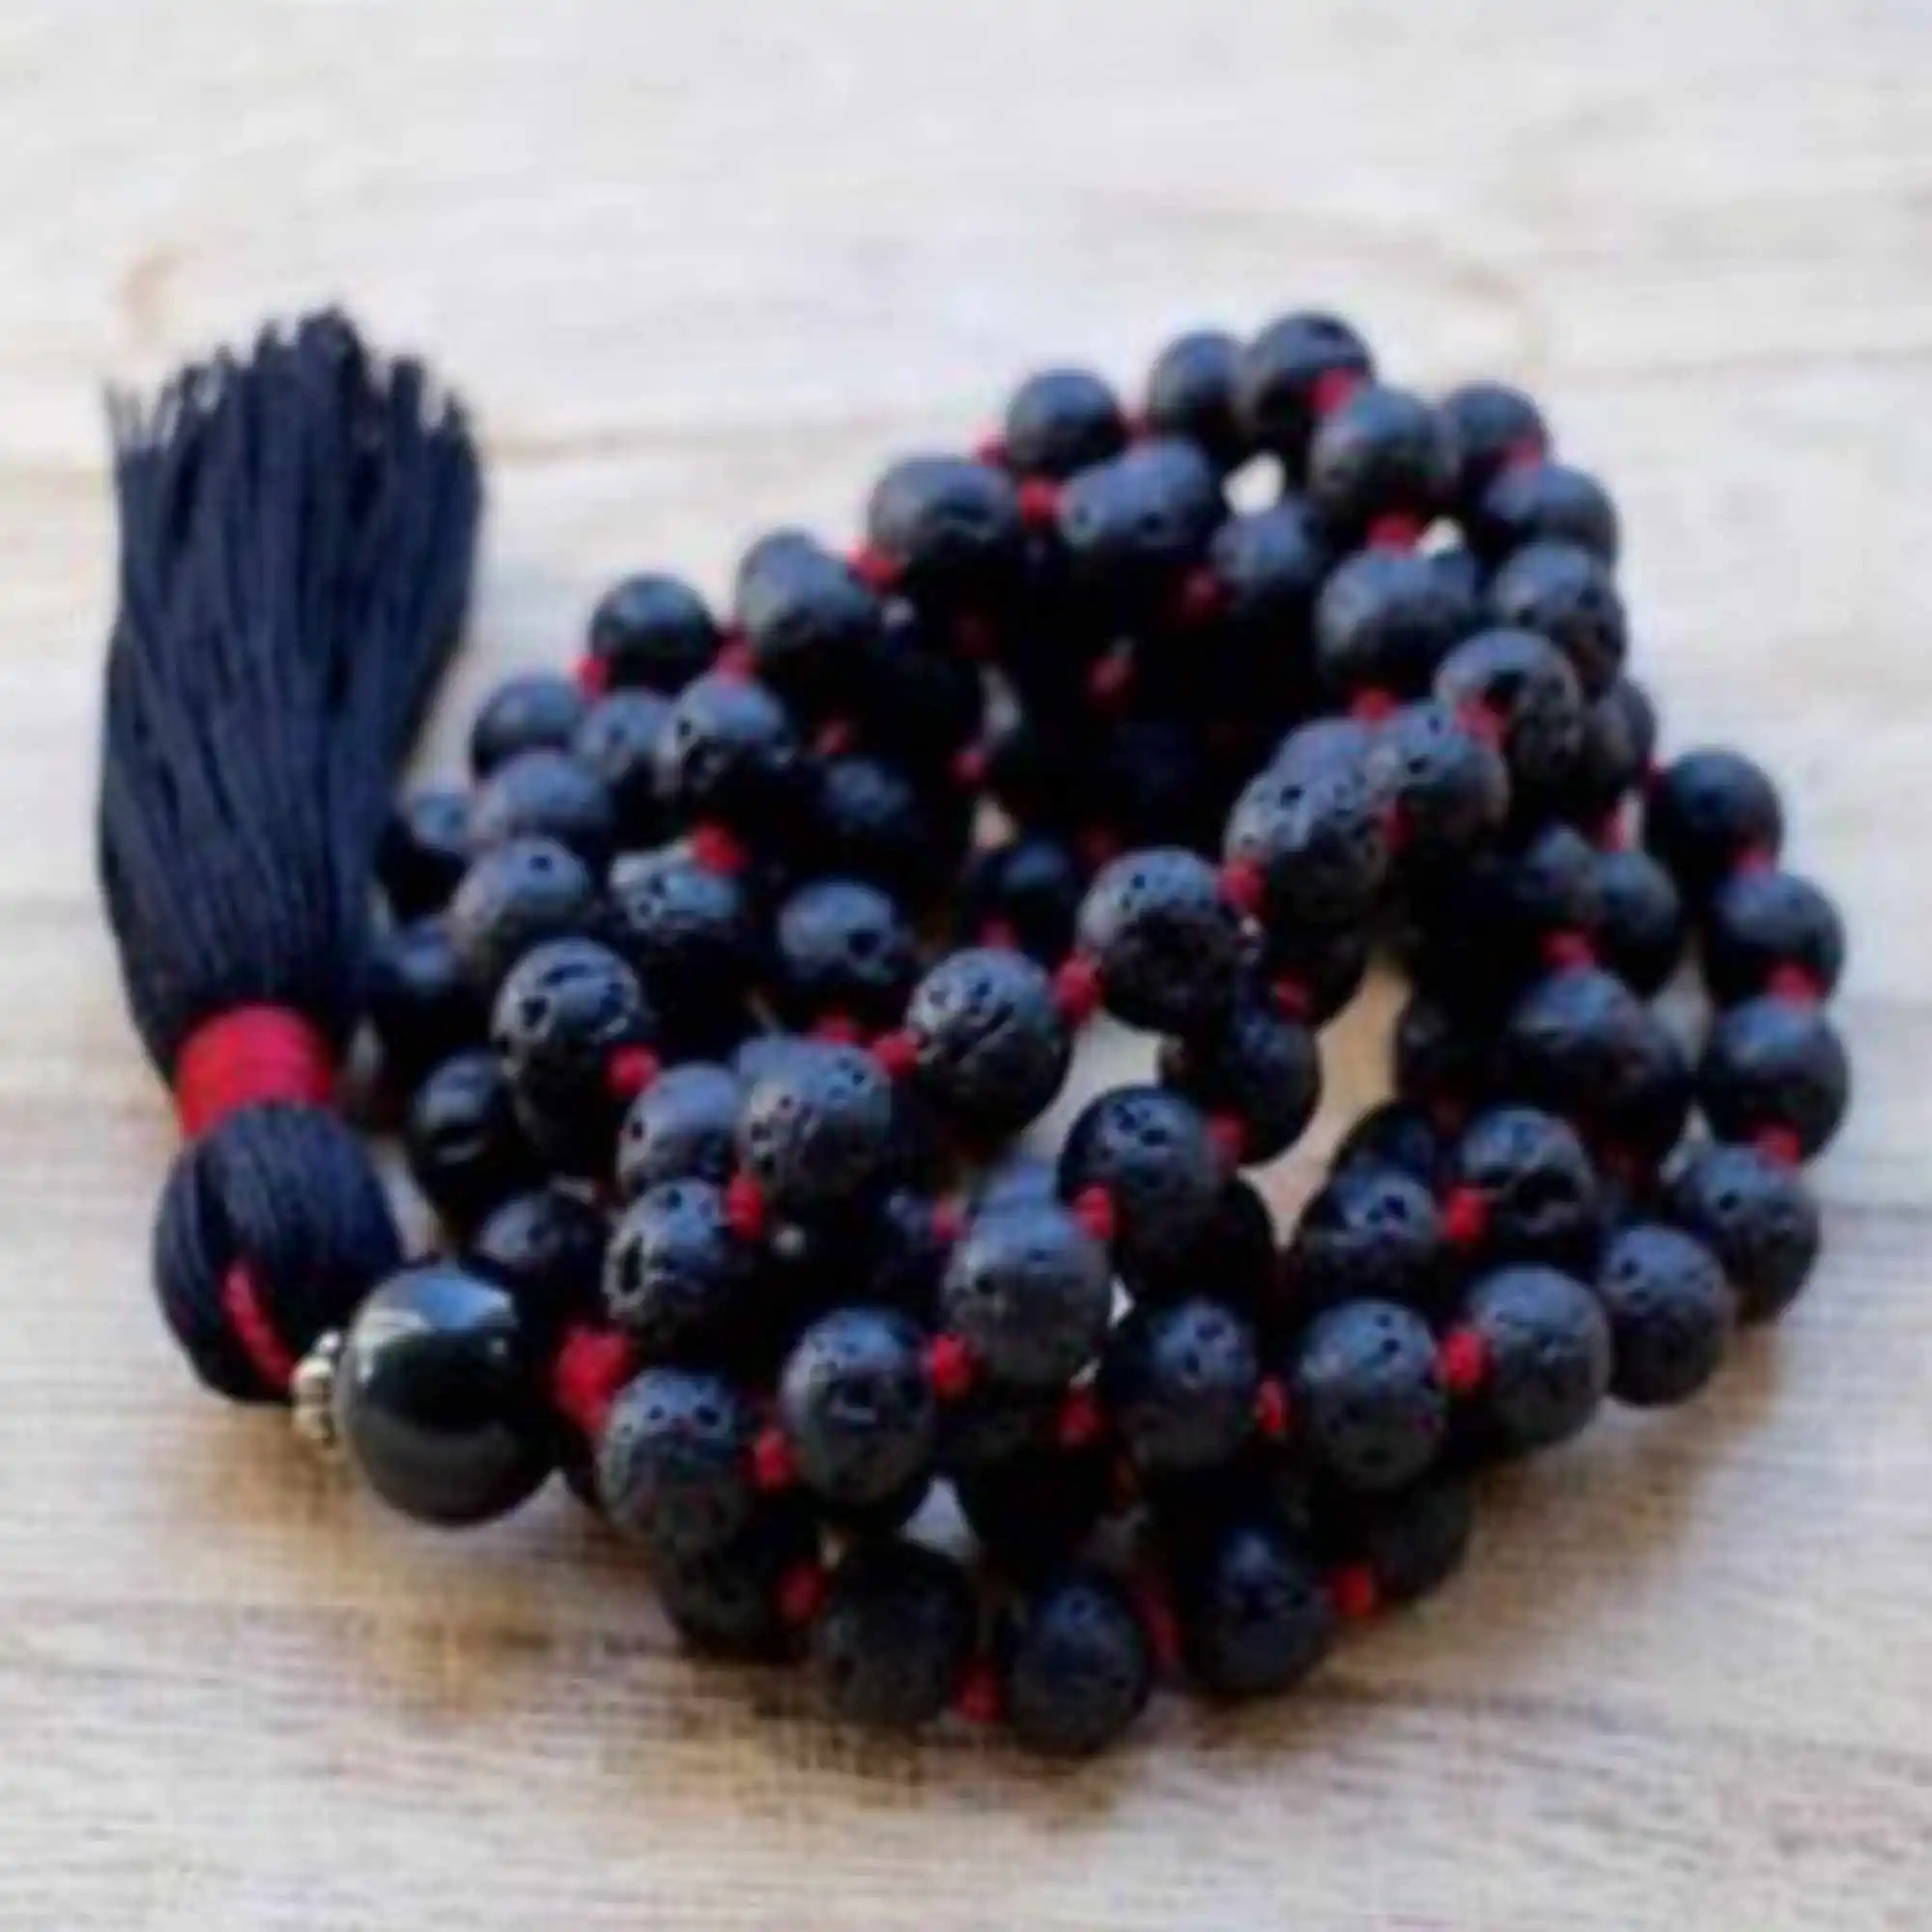 

8mm Natural 108 knot black lava gemstone beads tassels necklace Jewelry Natural Healing Women Gift Pendants Energy Jewellery